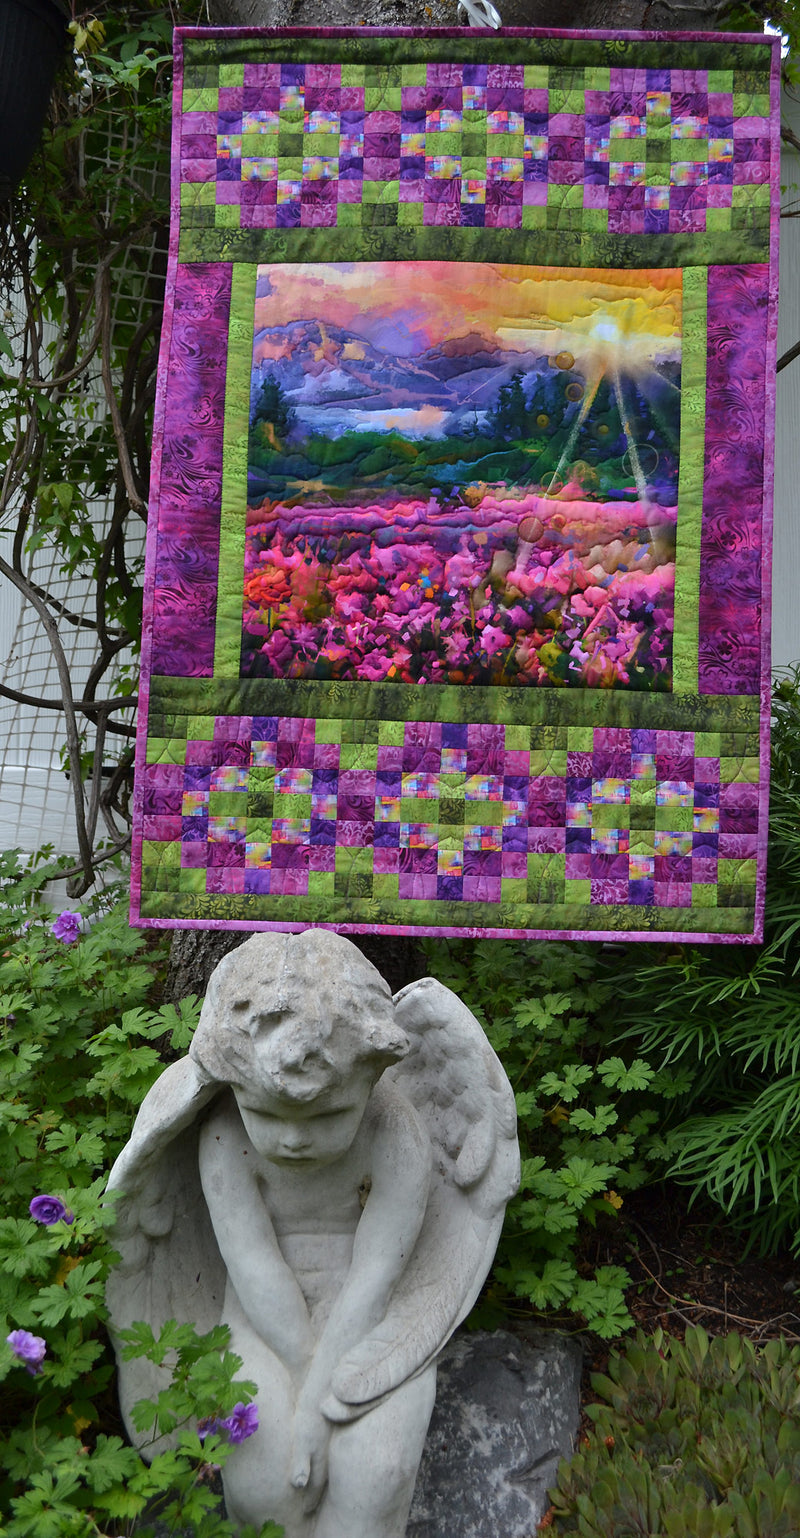 A Year of Art - Summer Wall Hanging Mountain Meadow Kit